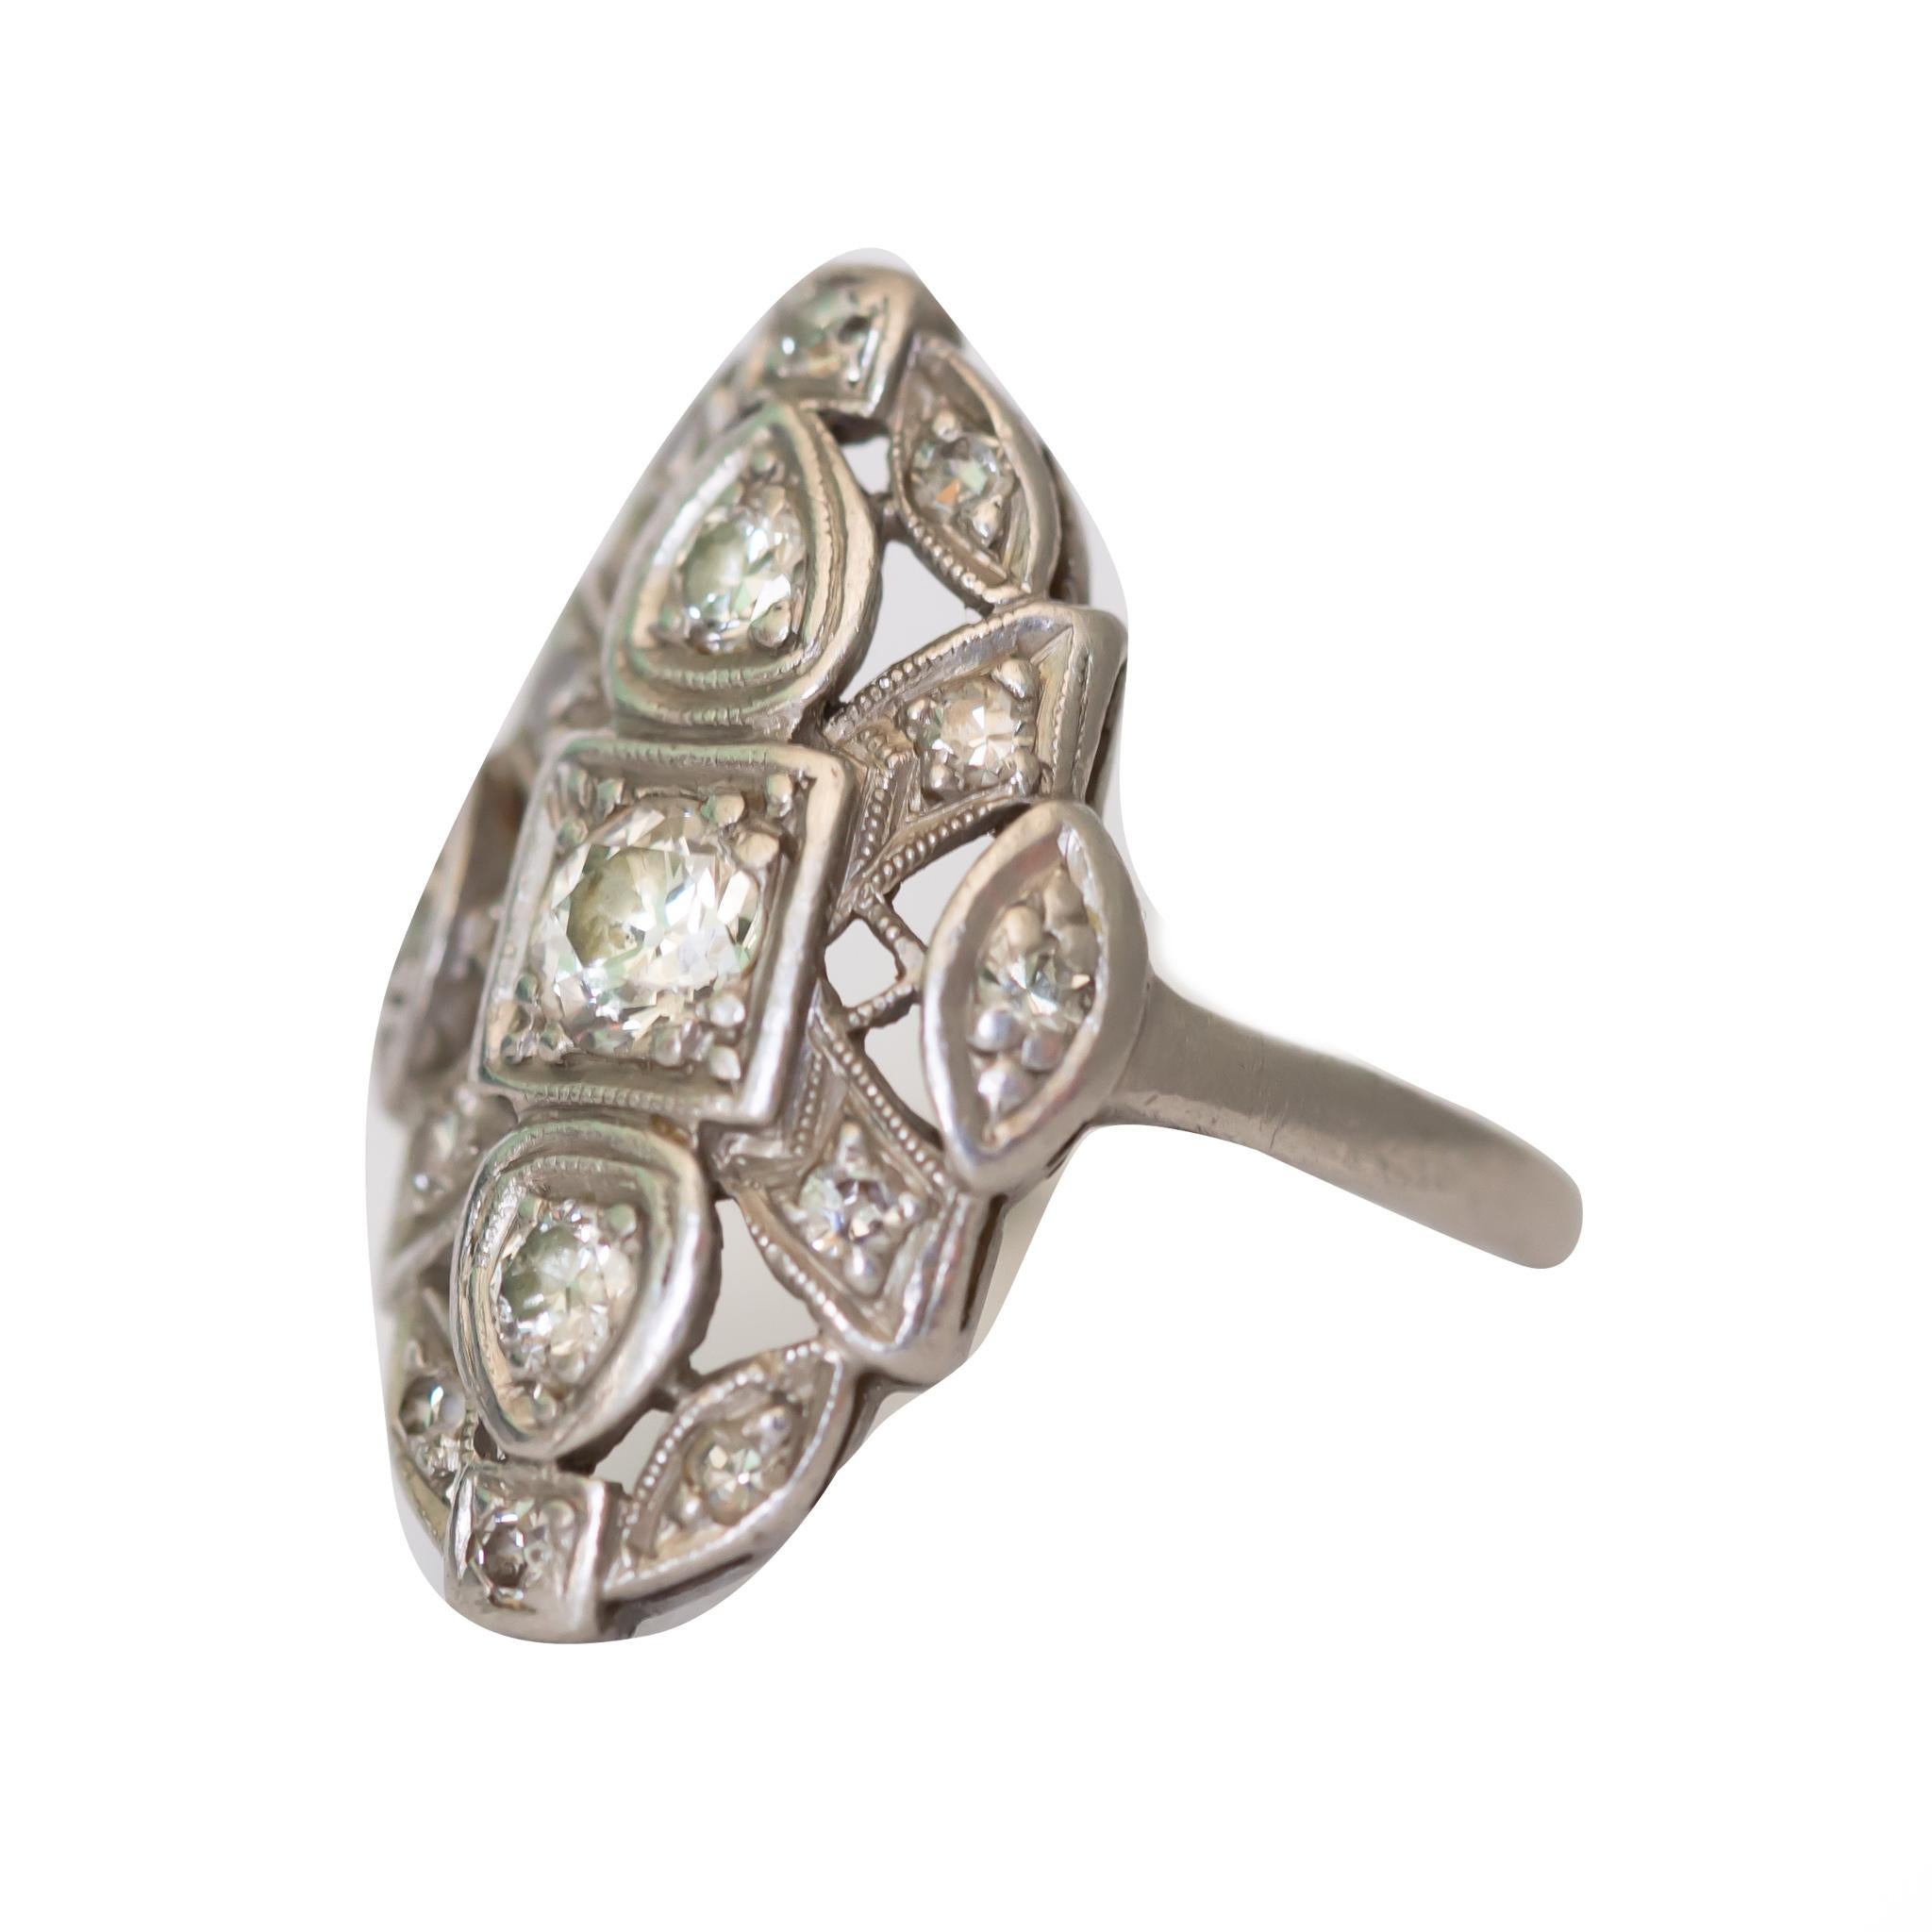 Ring Size: 5.75
Metal Type: Platinum  [Hallmarked, and Tested]
Weight:  4.6 grams

Diamond Details:
Weight: .50 carat, total weight
Cut: Old European Brilliant
Color: G-H
Clarity: VS

Finger to Top of Stone Measurement: 3mm
Condition:  Excellent